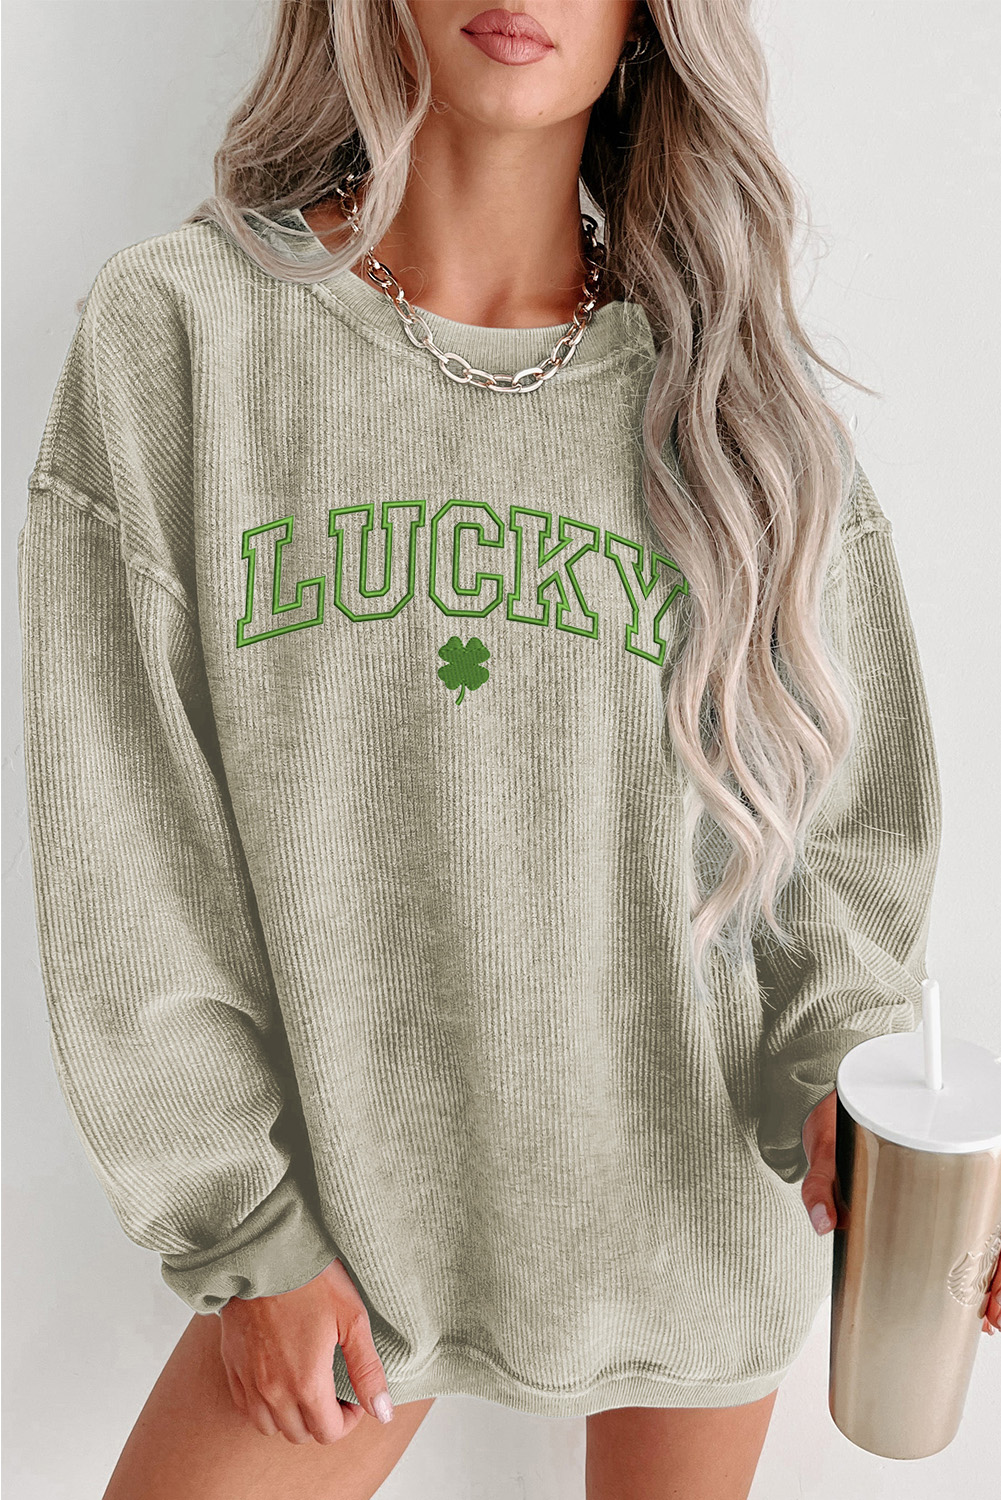 Shewin Wholesale New arrival Green LUCKY Clover Graphic Corded Crewneck SWEATSHIRT